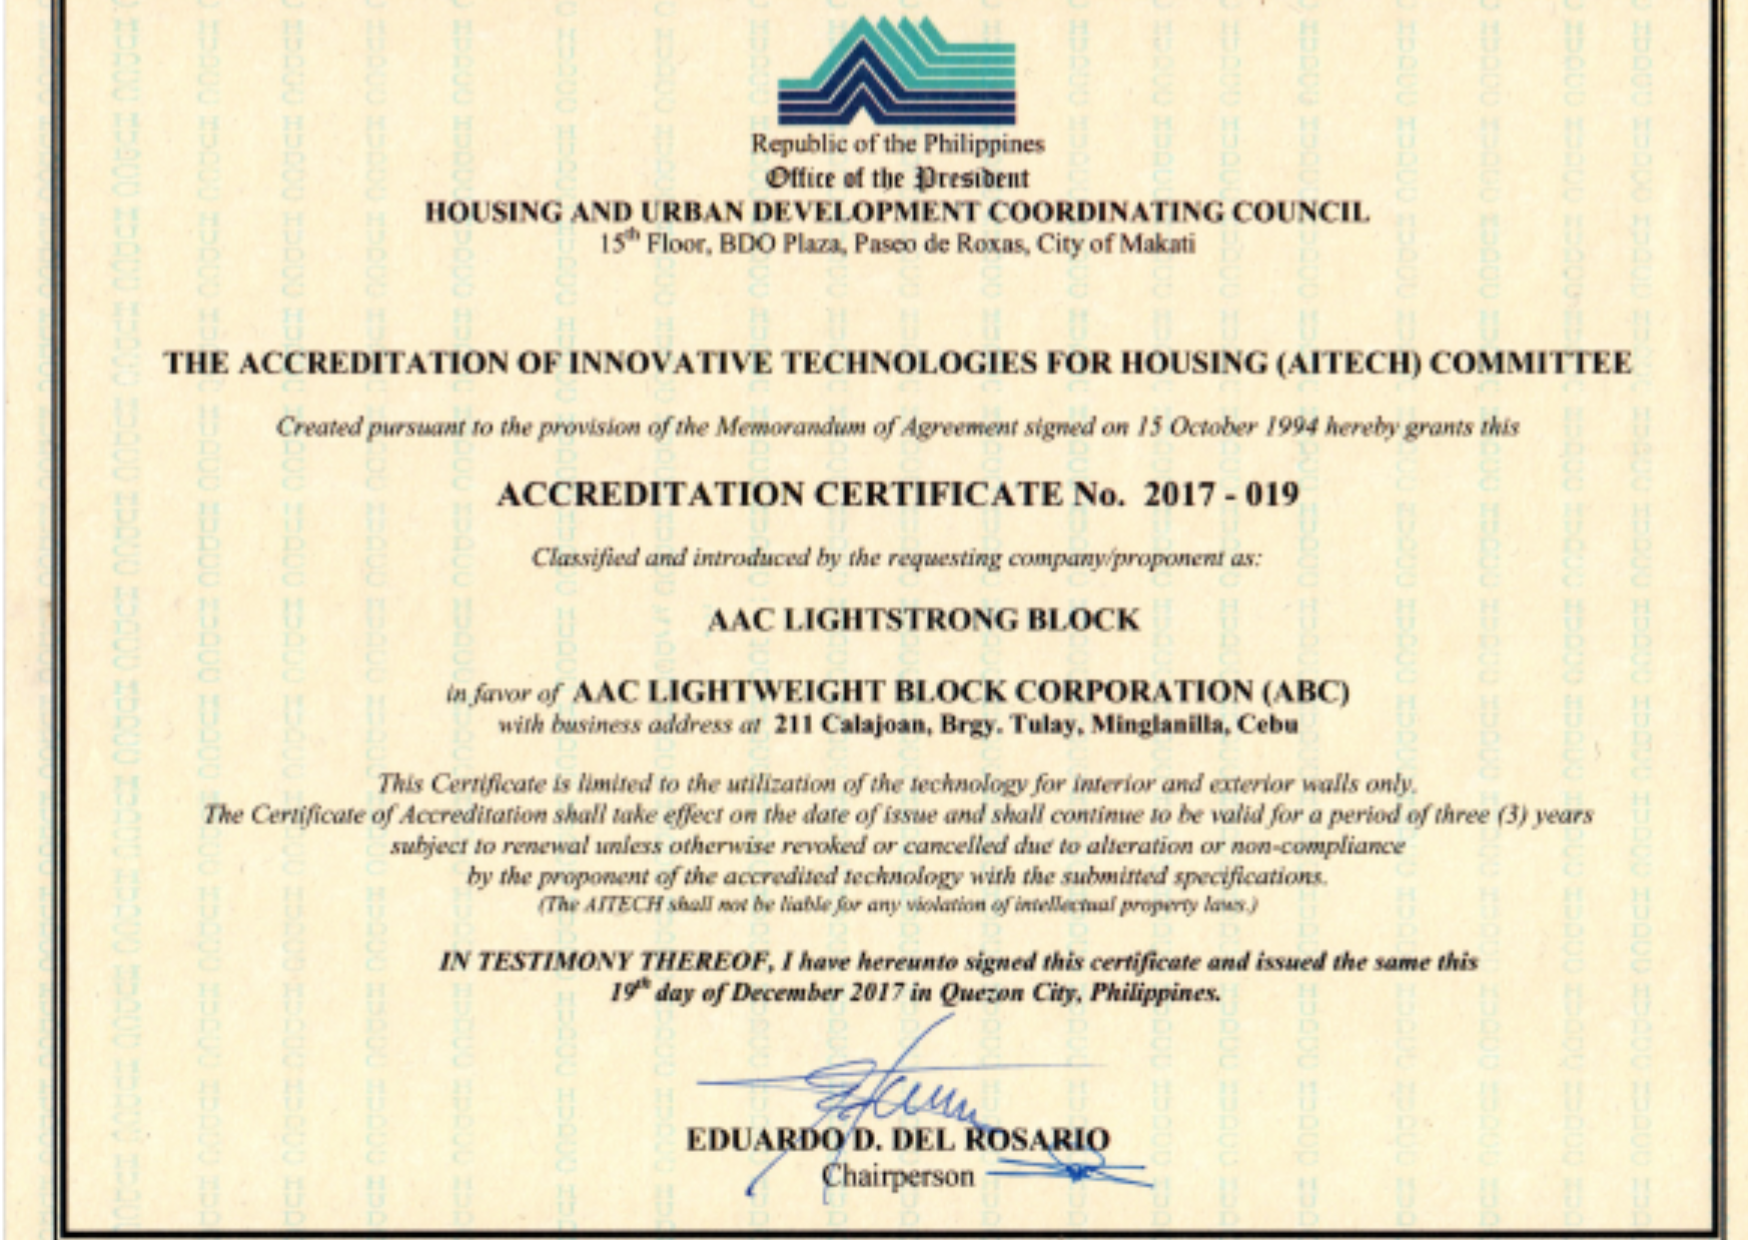 The salient features of LightStrong AAC Block make it ideal for residential projects. The Housing and Urban Development Coordinating Council awards LightStrong AAC with an AITECH (Accreditation of Innovative Technologies for Housing) Certificate allowing the use of the walling system for NHA (National Housing Authority) Housing Projects.